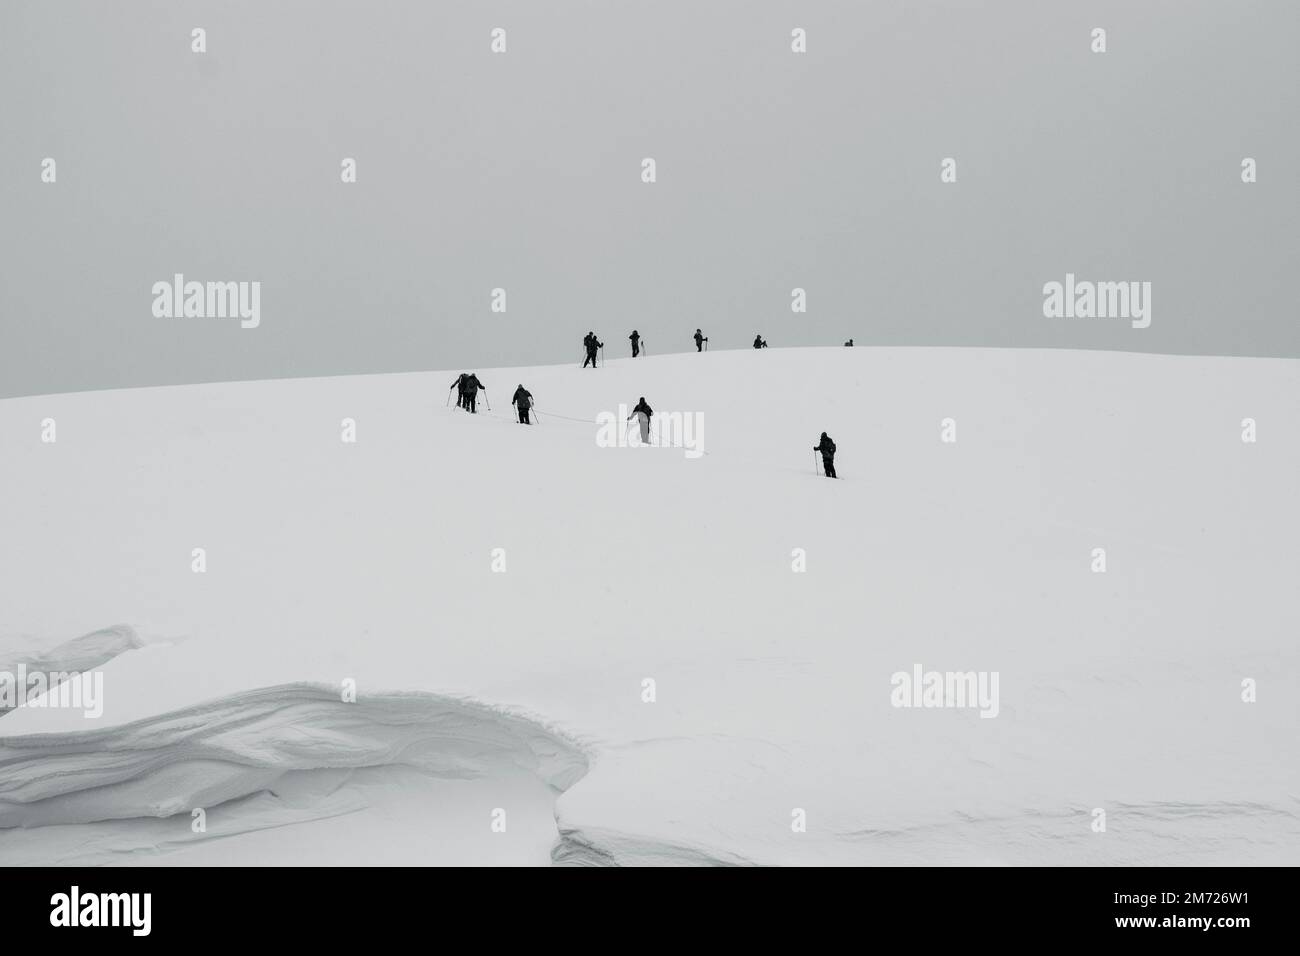 Silhouette of four people walking down a small snowy path in Antarctica. Stock Photo